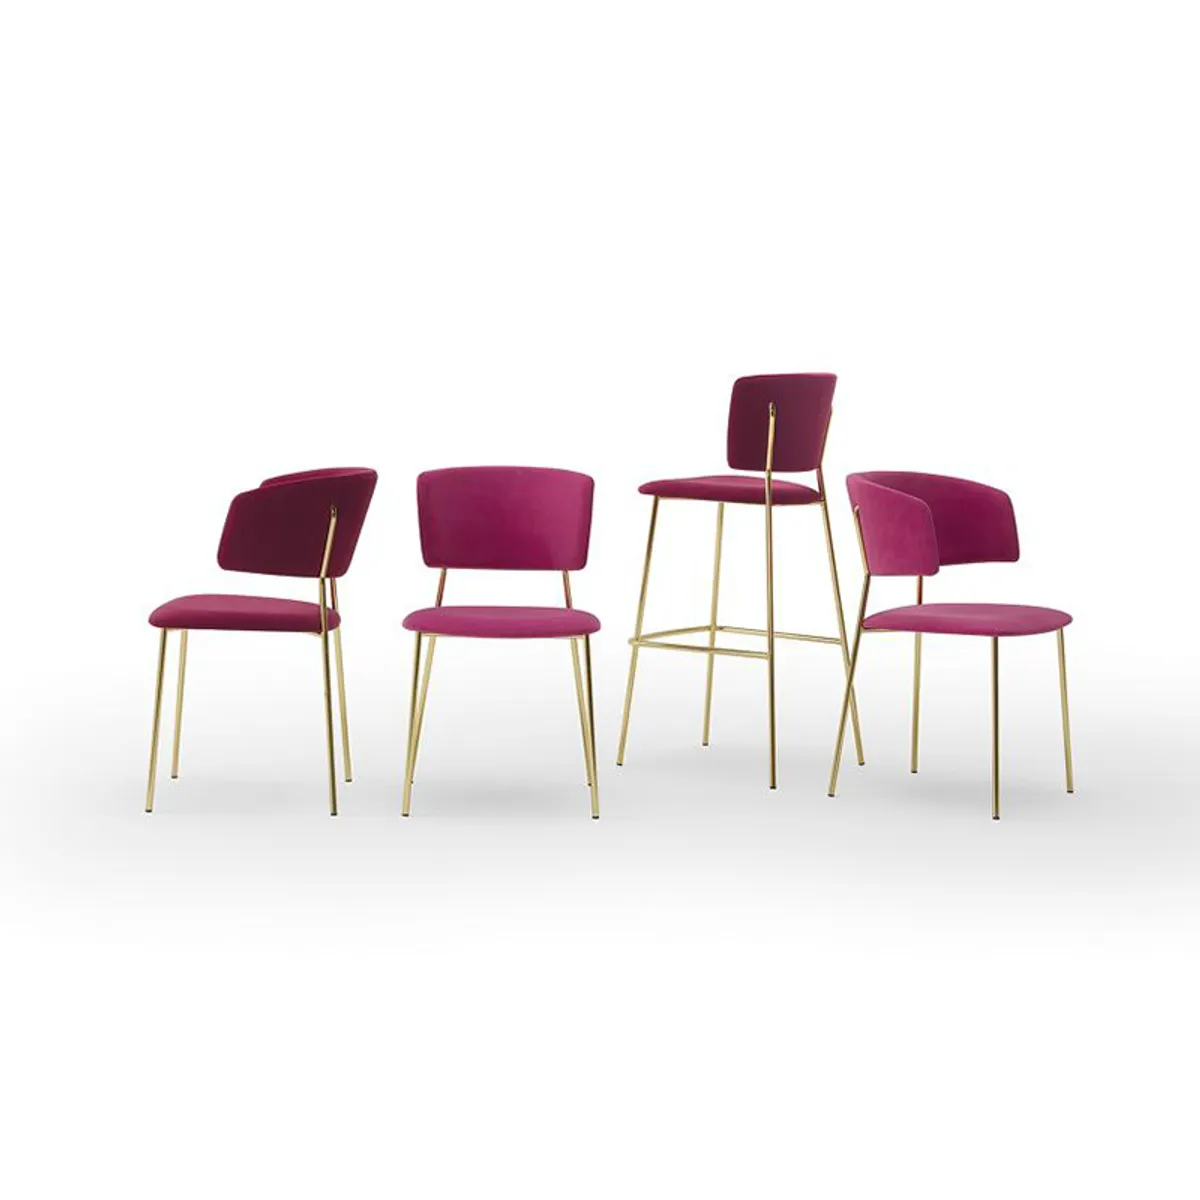 Macaron Metal Chair Collection Hotel And Restaurant Furniture With Steel Frame